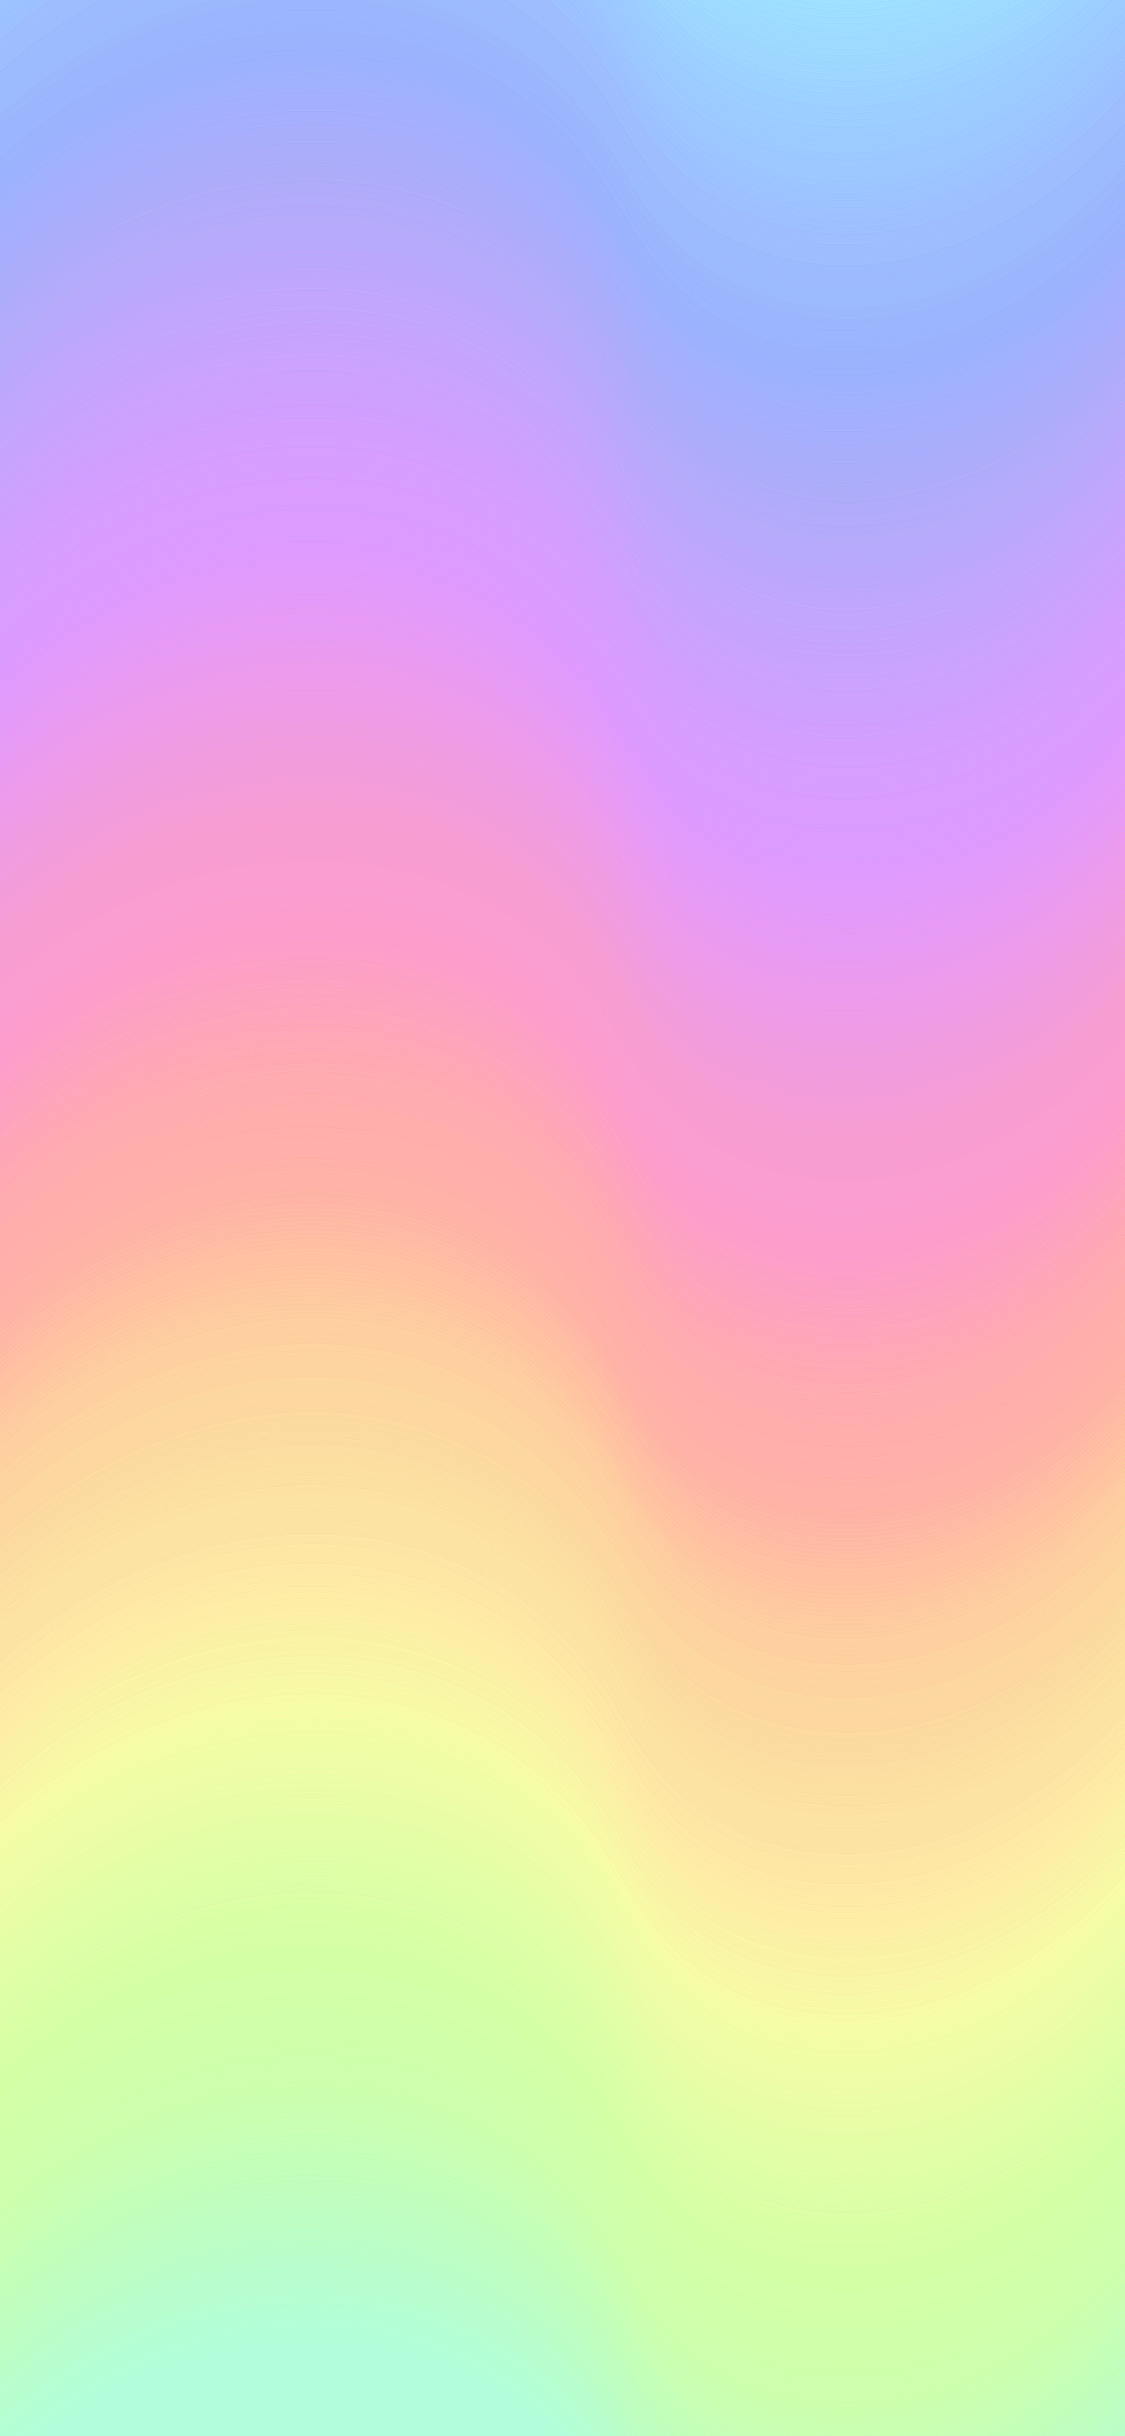 A blurry image of a rainbow gradient. - Clean